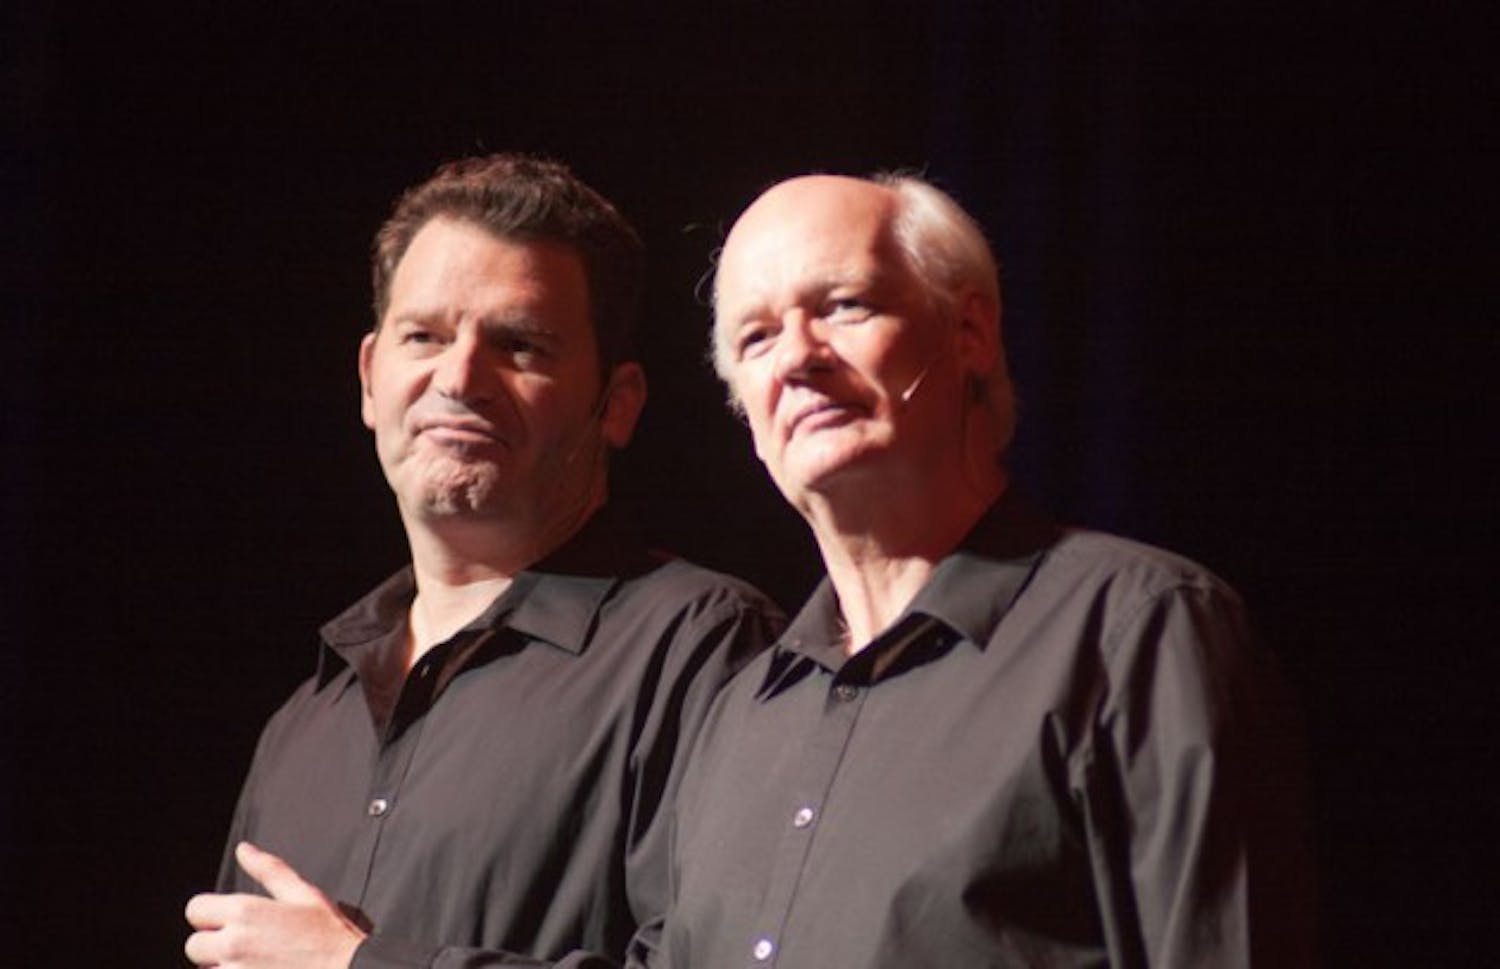 &ldquo;Whose Line is it Anyway?&rdquo; comedians, Colin Mochrie and Brad Sherwood, performed a two-man improv show Friday night at the CFA.
Jeff Scott, The Spectrum